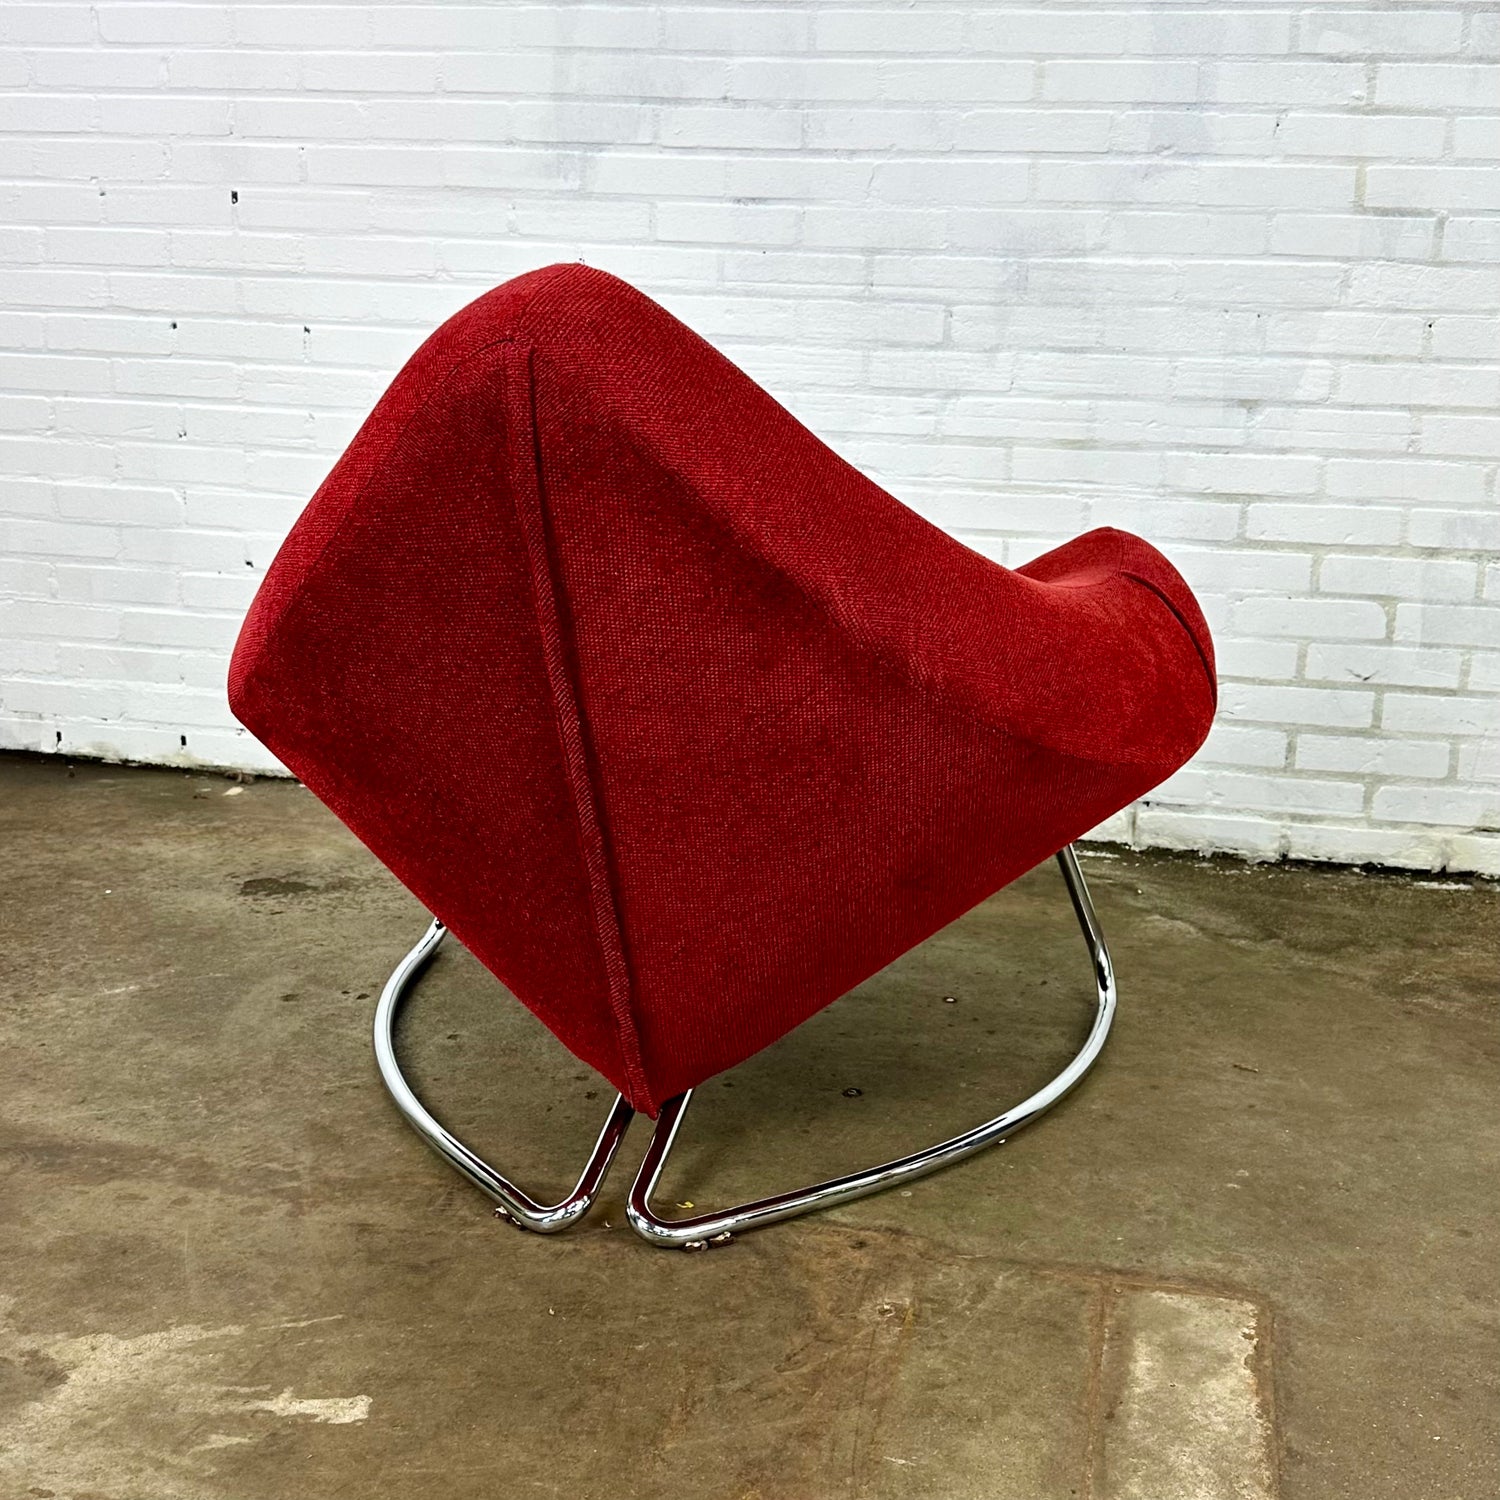 chili-lounge-chair-by-paul-falkenberg-for-rom